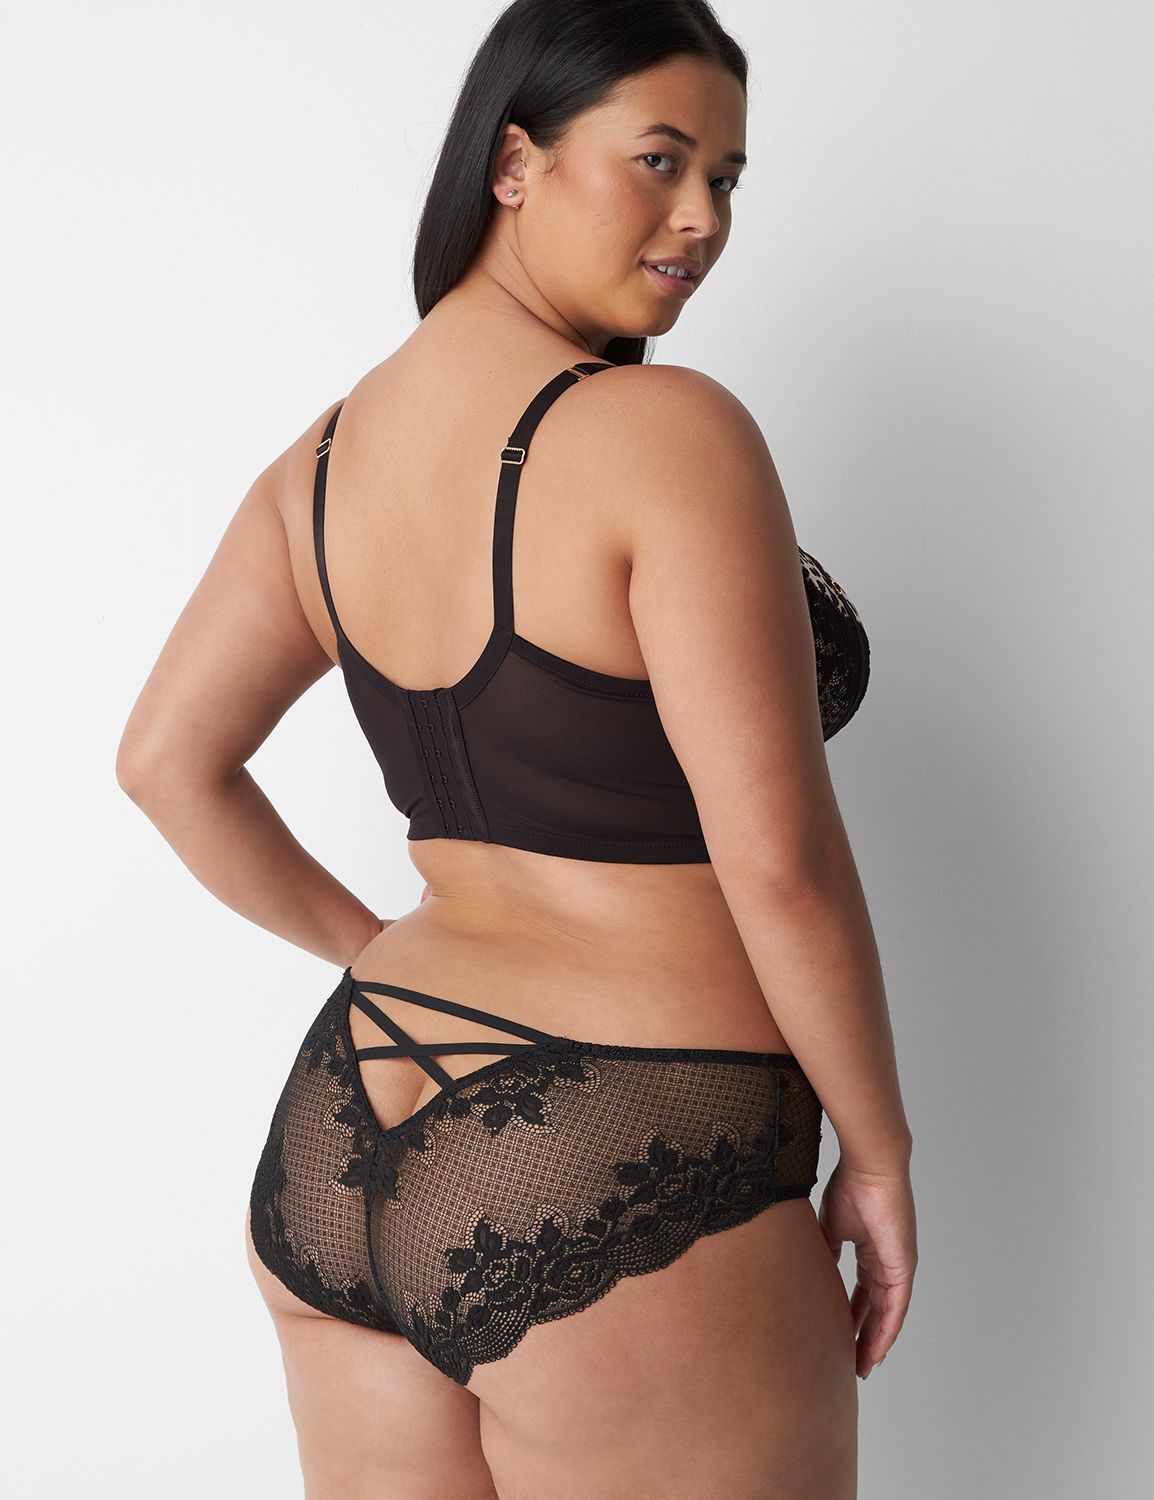 Lace Cheeky Brief Panty